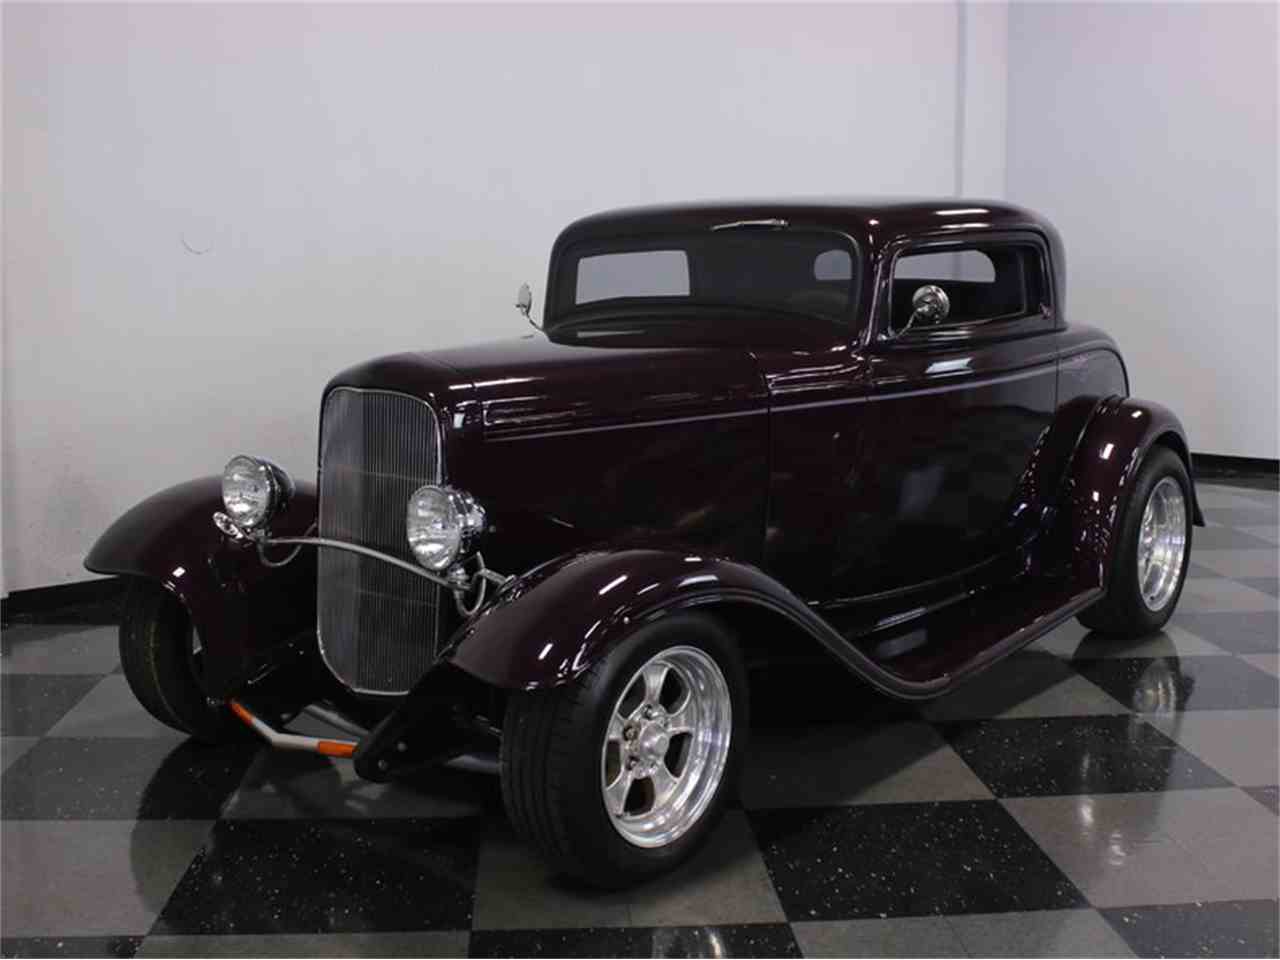 1932 Ford Coupe HD wallpapers, Desktop wallpaper - most viewed